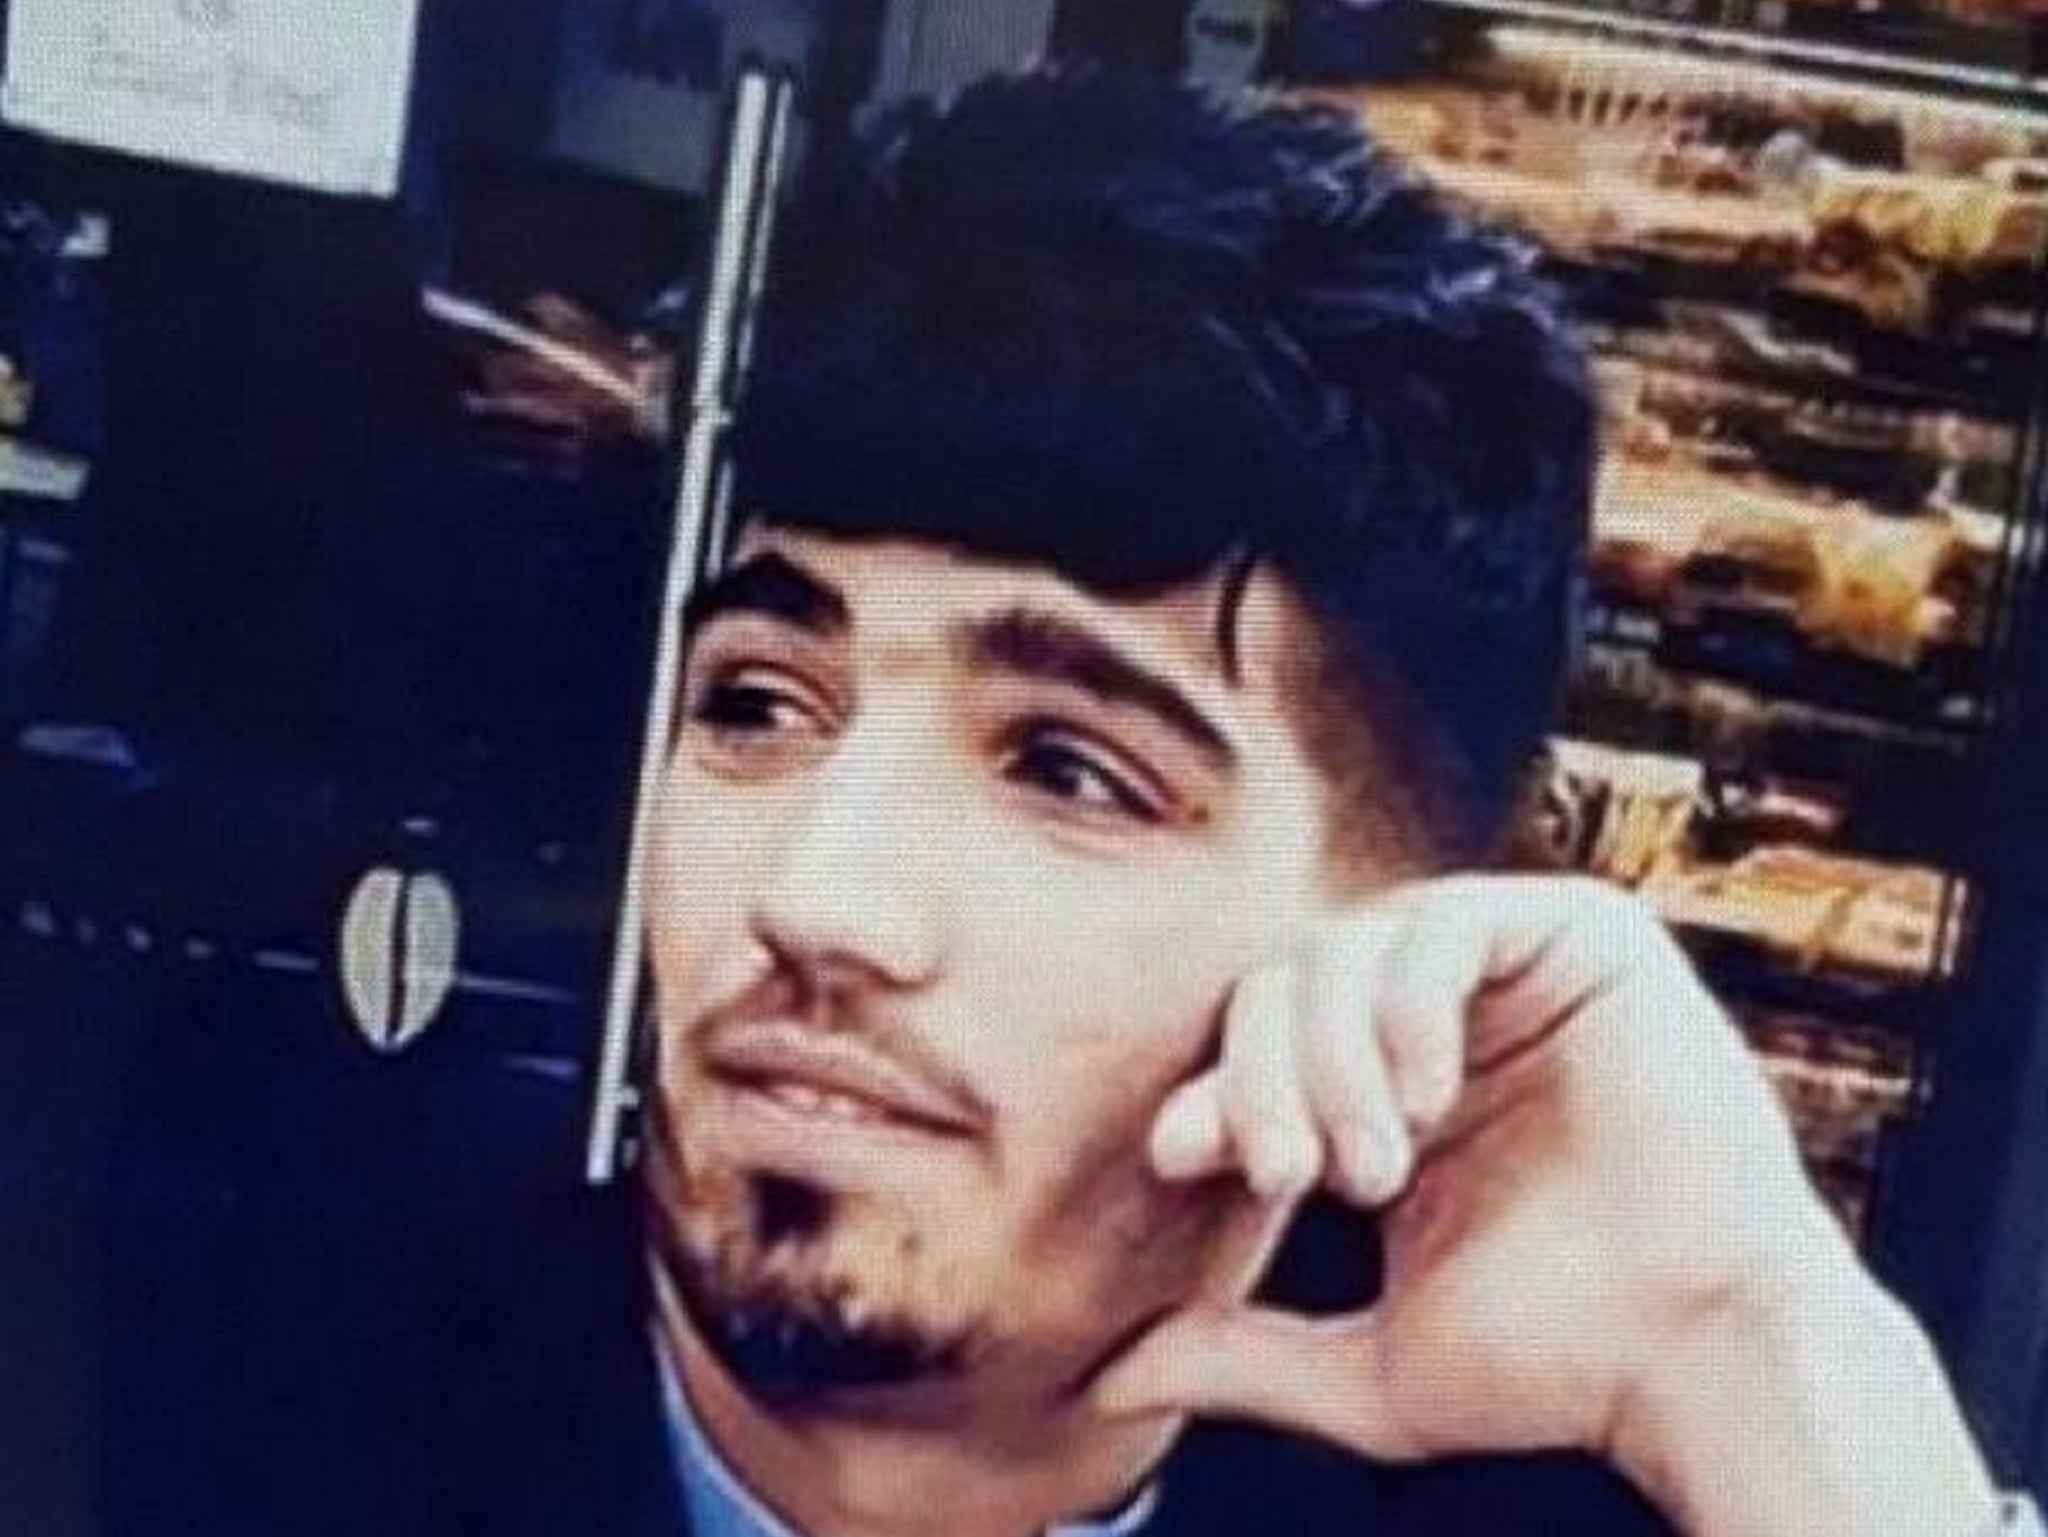 Moosakhan Nasiri, 20, was found stabbed to death at a park in Newham, London, in October 2017 after moving to the UK from Afghanistan ‘to be safe’